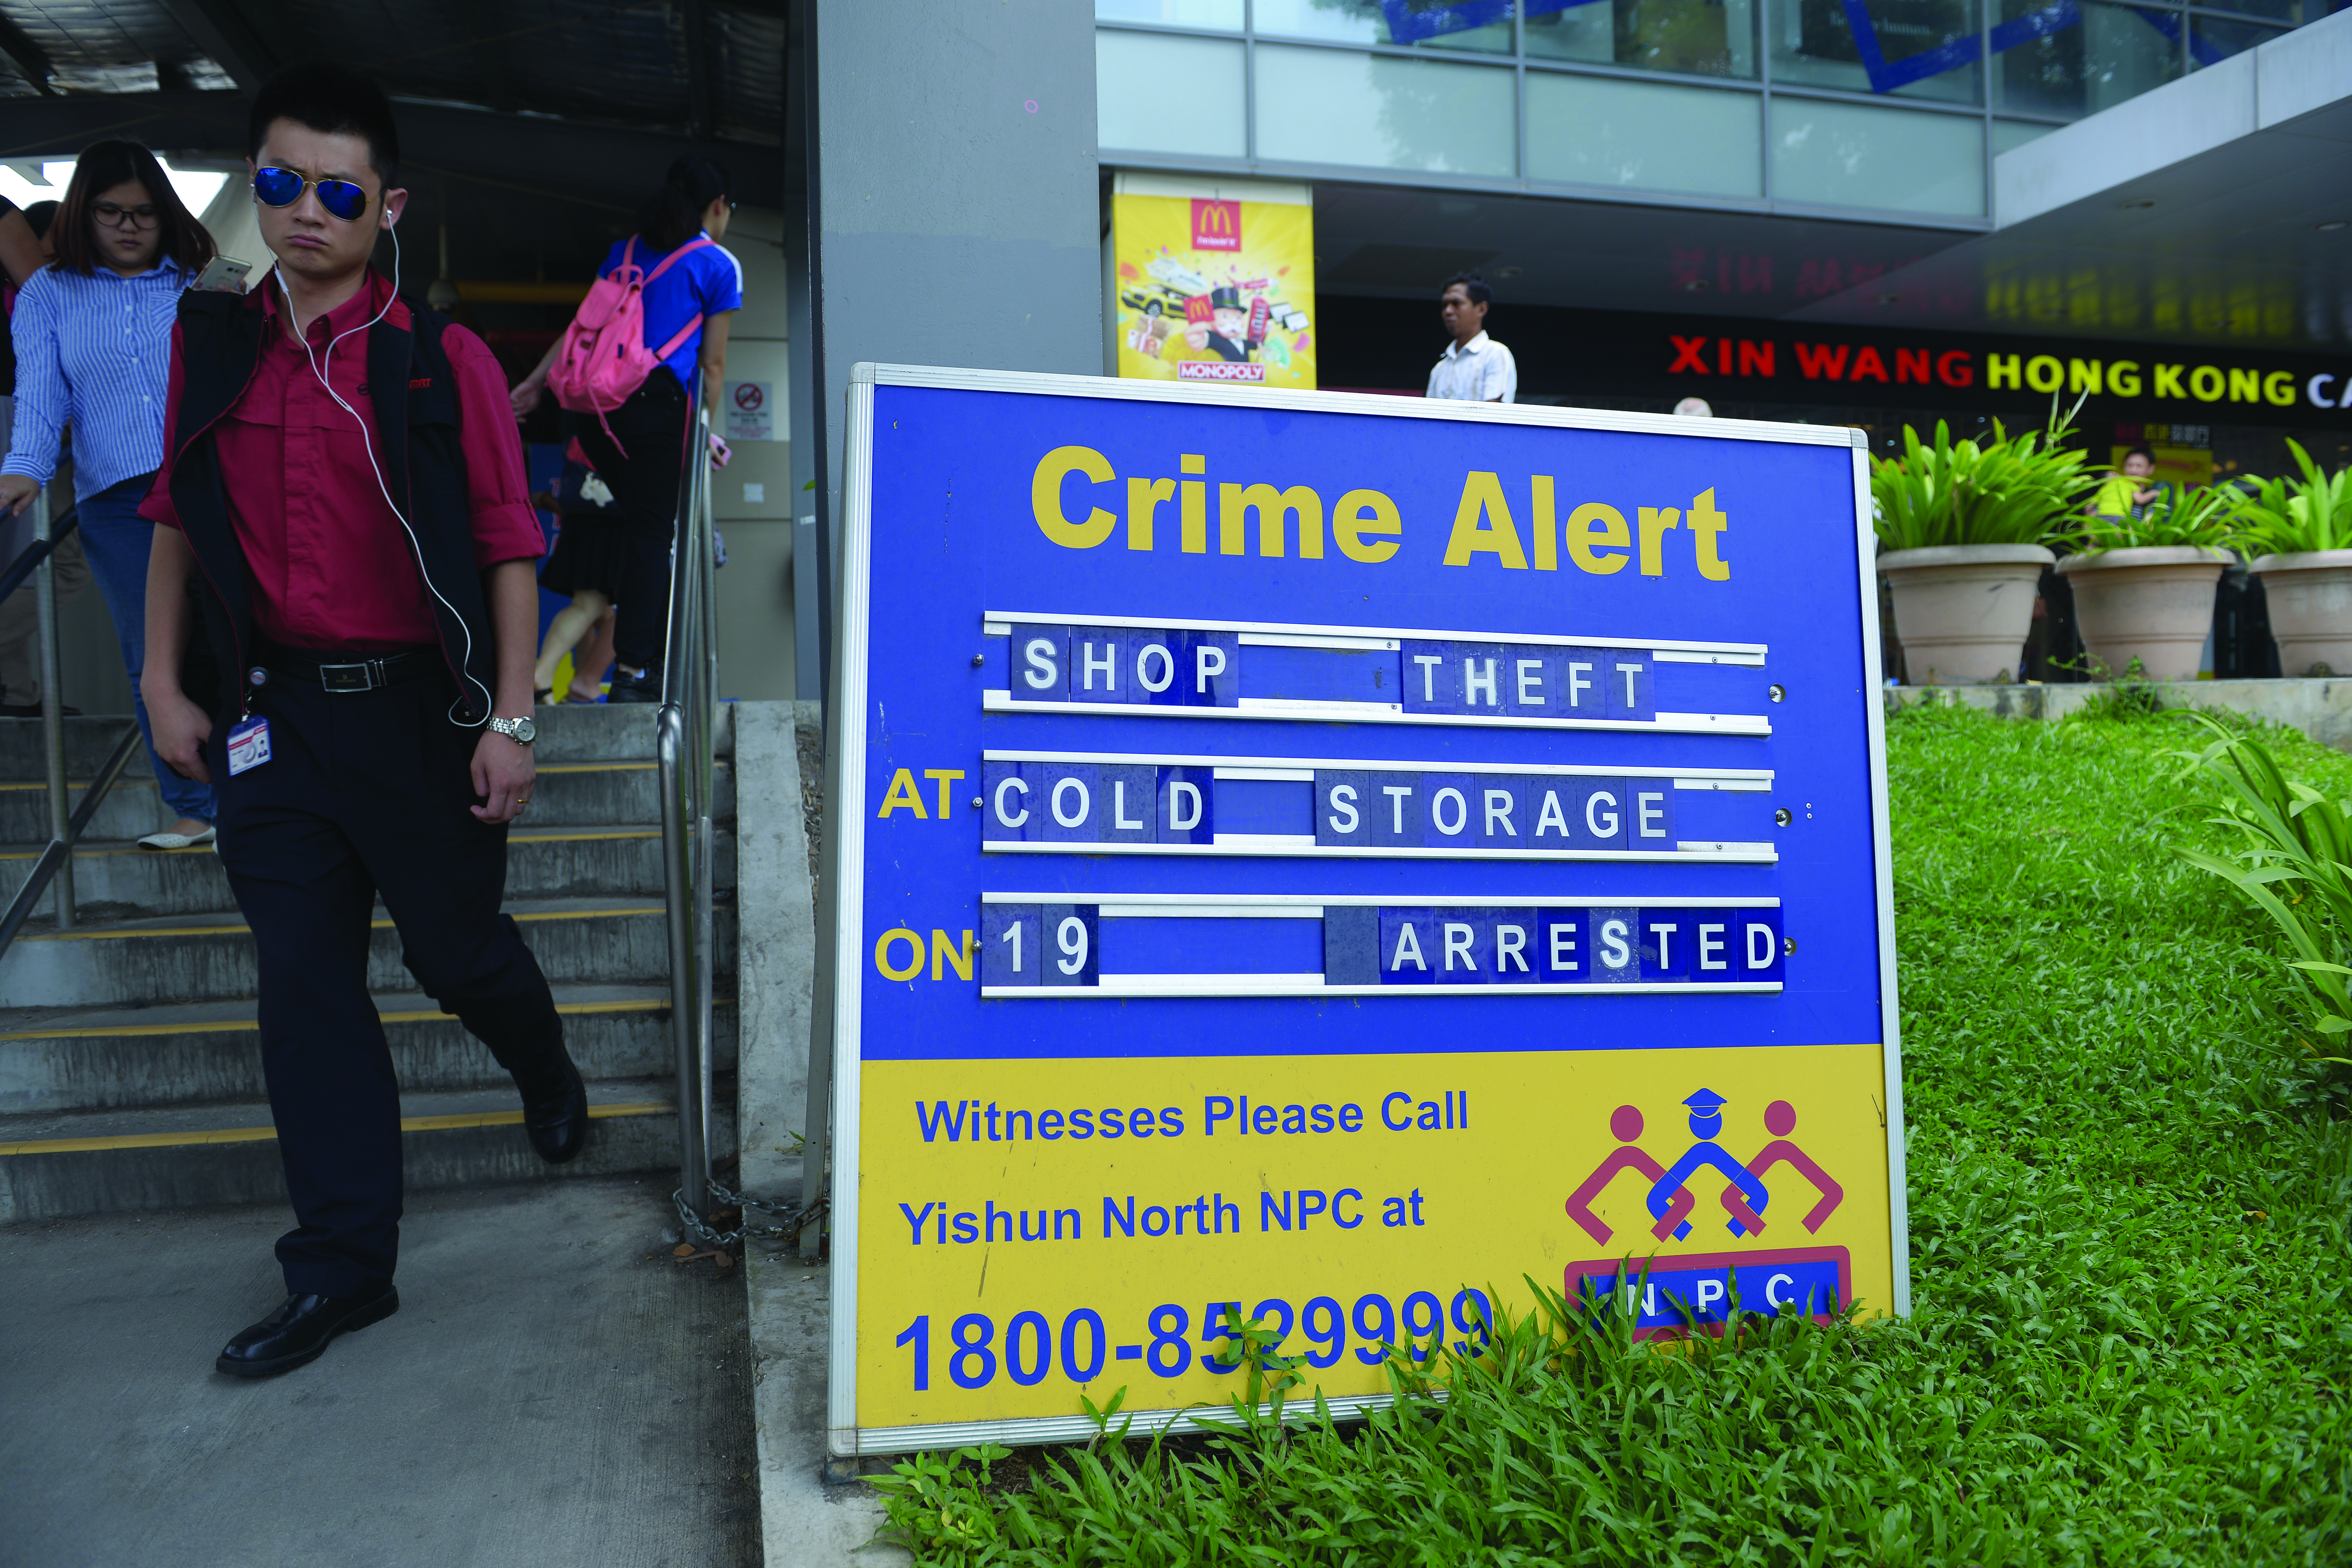 THUG LIFE: At least 16 incidents have been reported in Yishun since 2015. #Yishunthuglife has since become an active hashtag. PHOTO: Marcus Tan